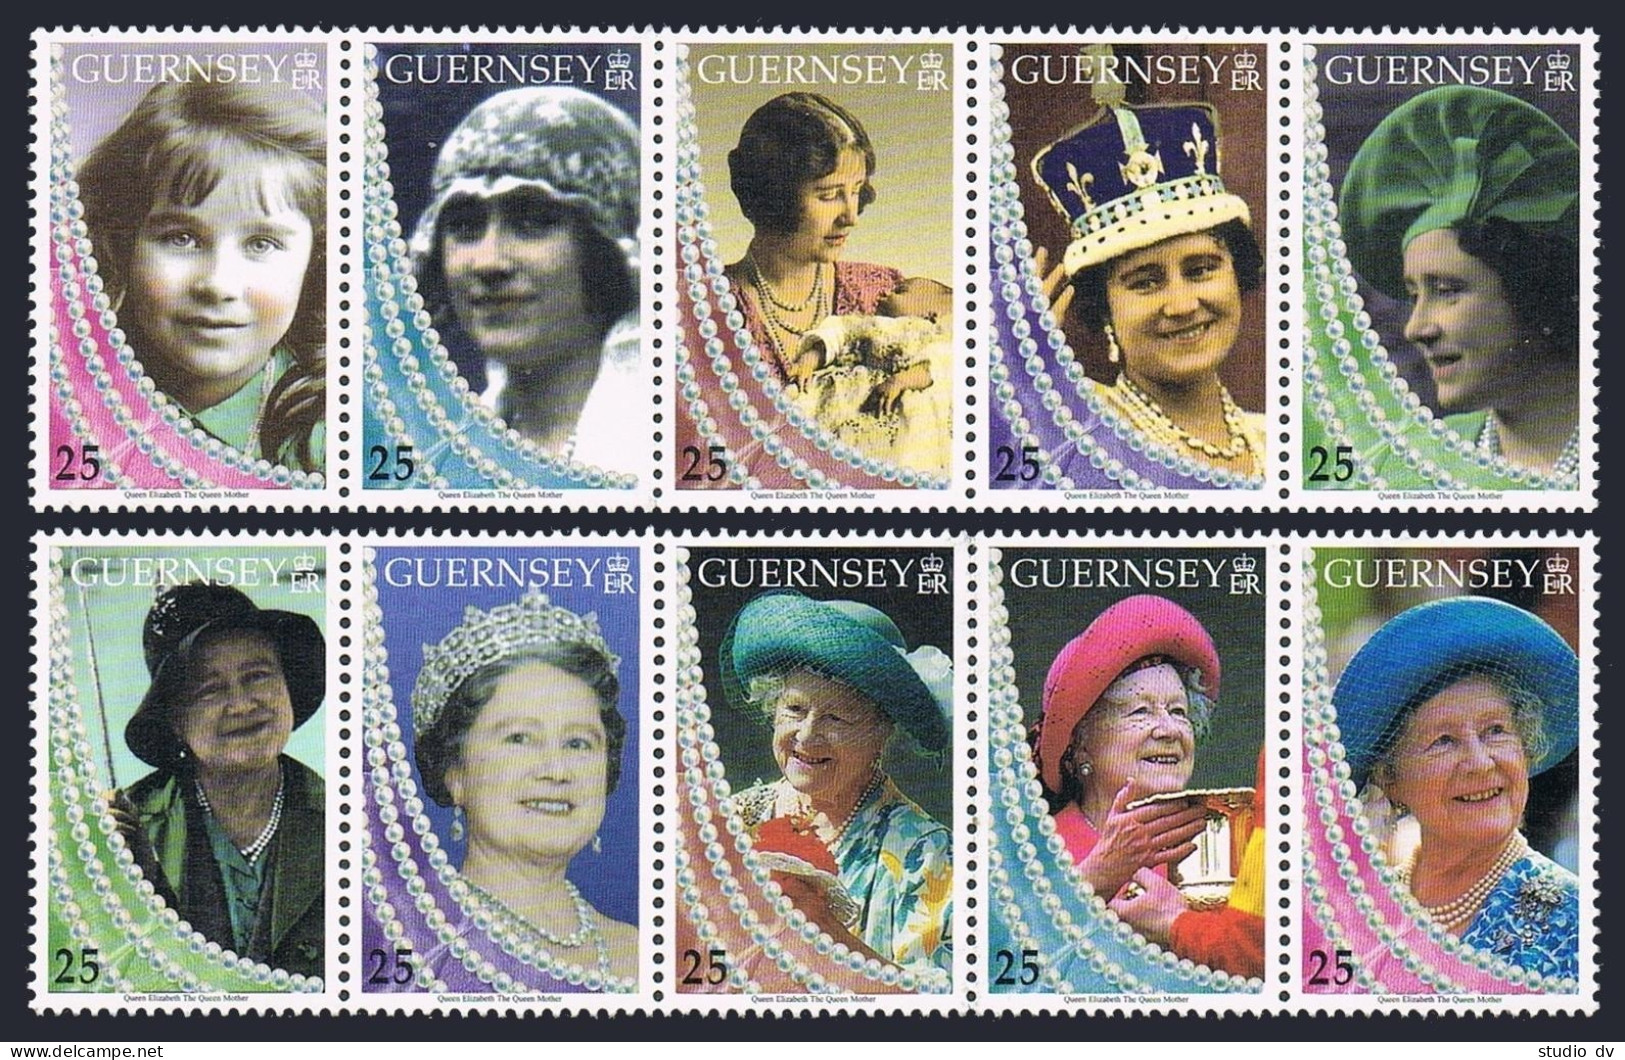 Guernsey 670-679a Two Strips,MNH. Queen Mother Elizabeth,1999.Pearls,photographs - Guernsey